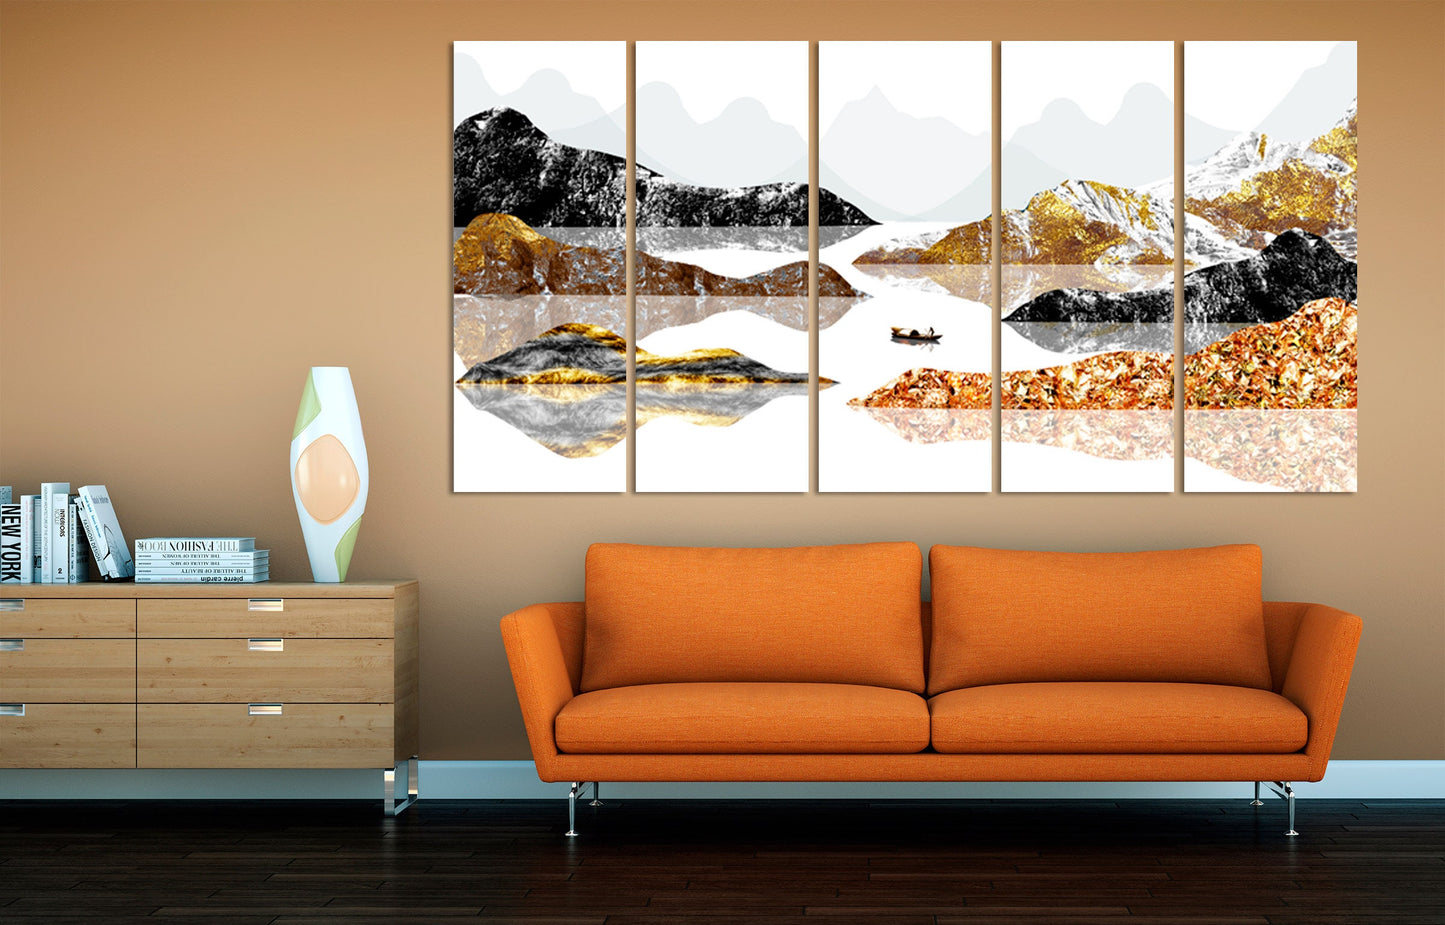 Gold mountains wall art paintings on canvas Seine river art Wall pictures mountains nature print home wall decor calm horizontal art